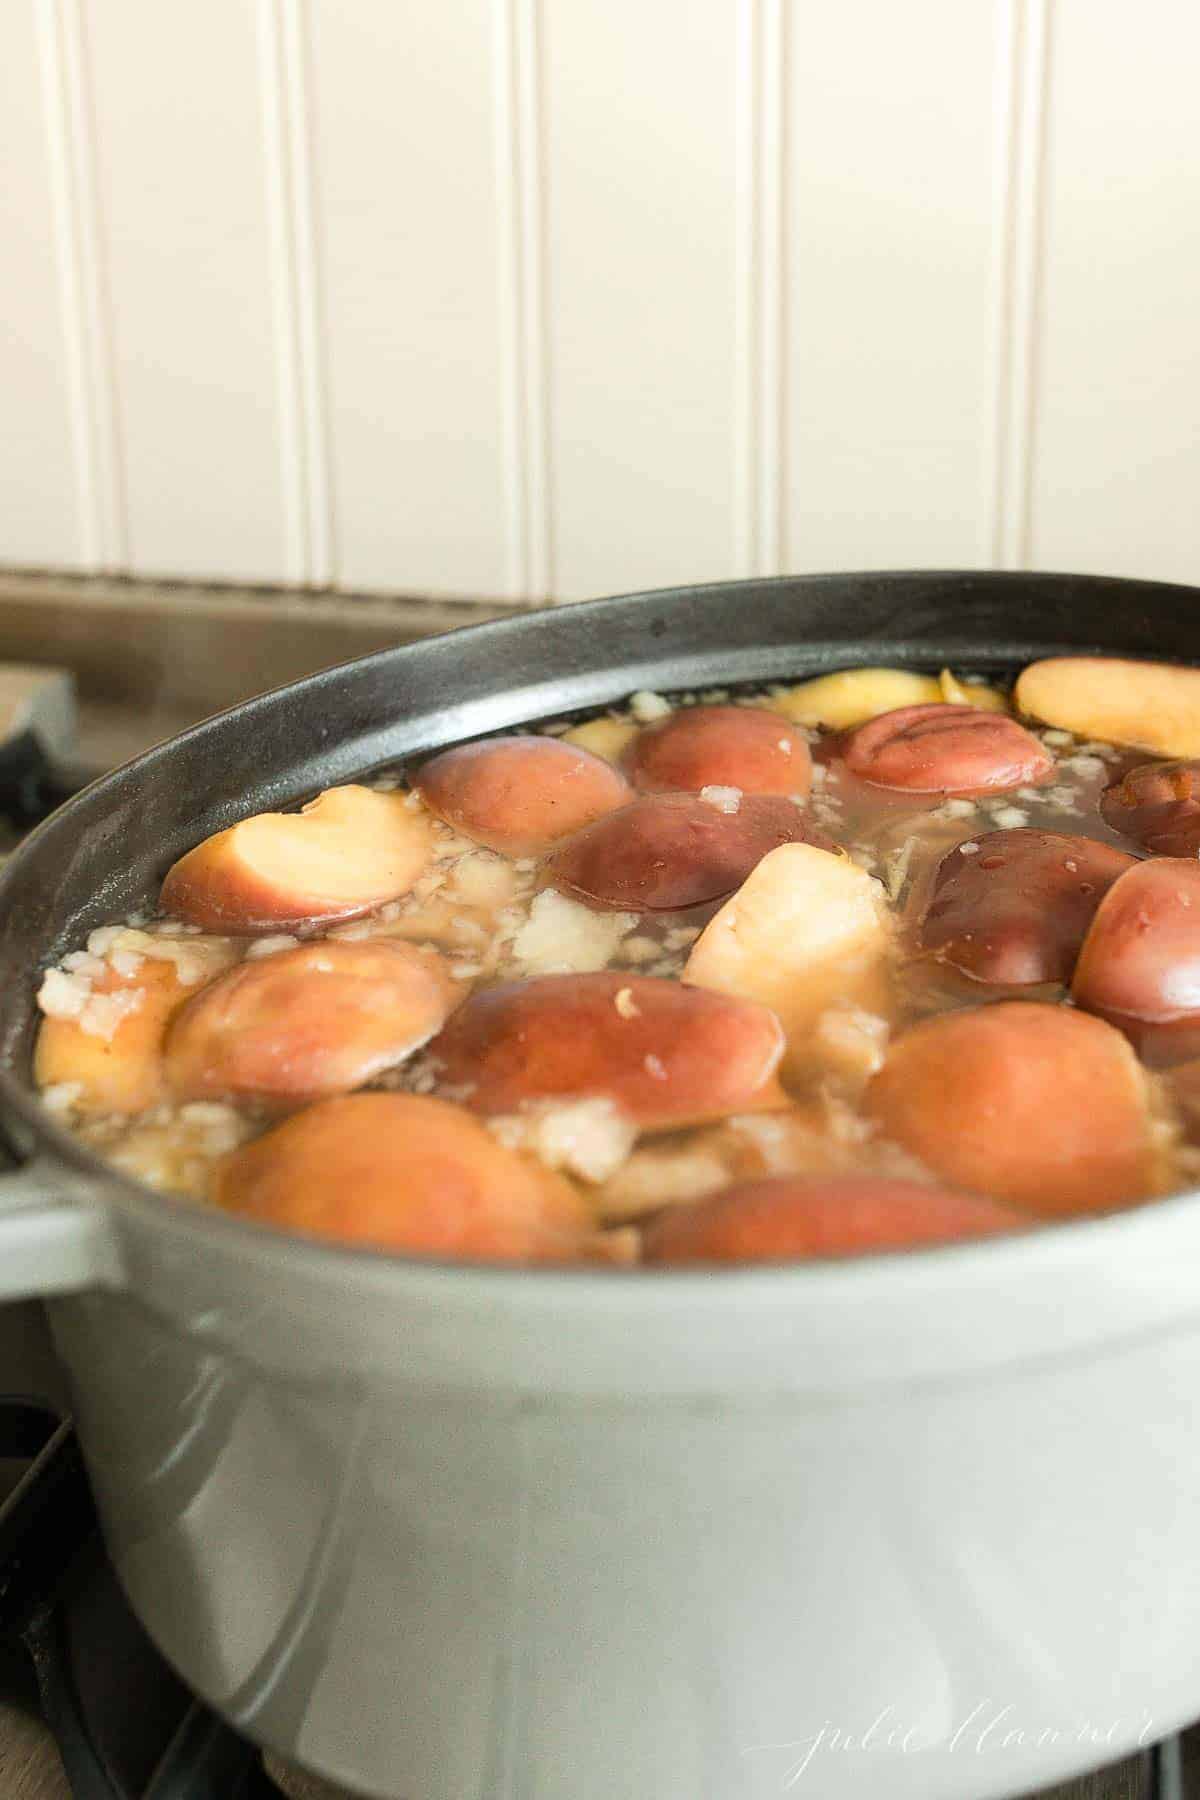 A gray cast iron pan on a stove, filled with cooked apples and oranges for a homemade apple cider recipe.